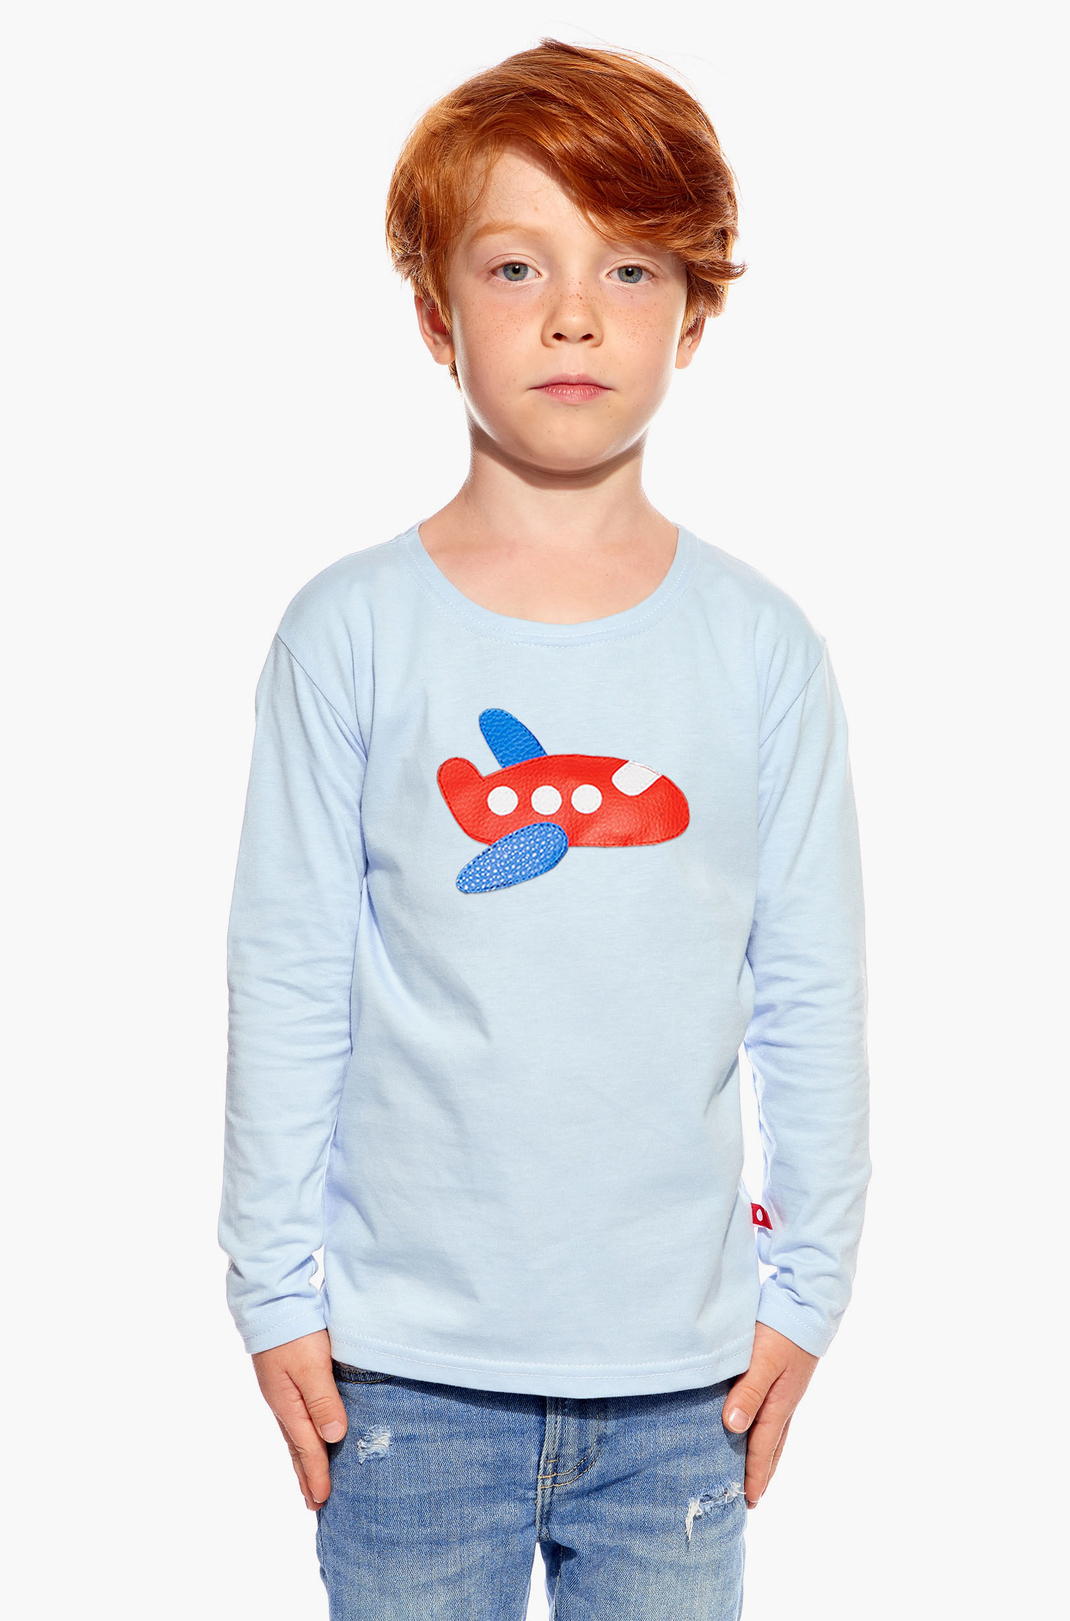 Shirt with an airplane